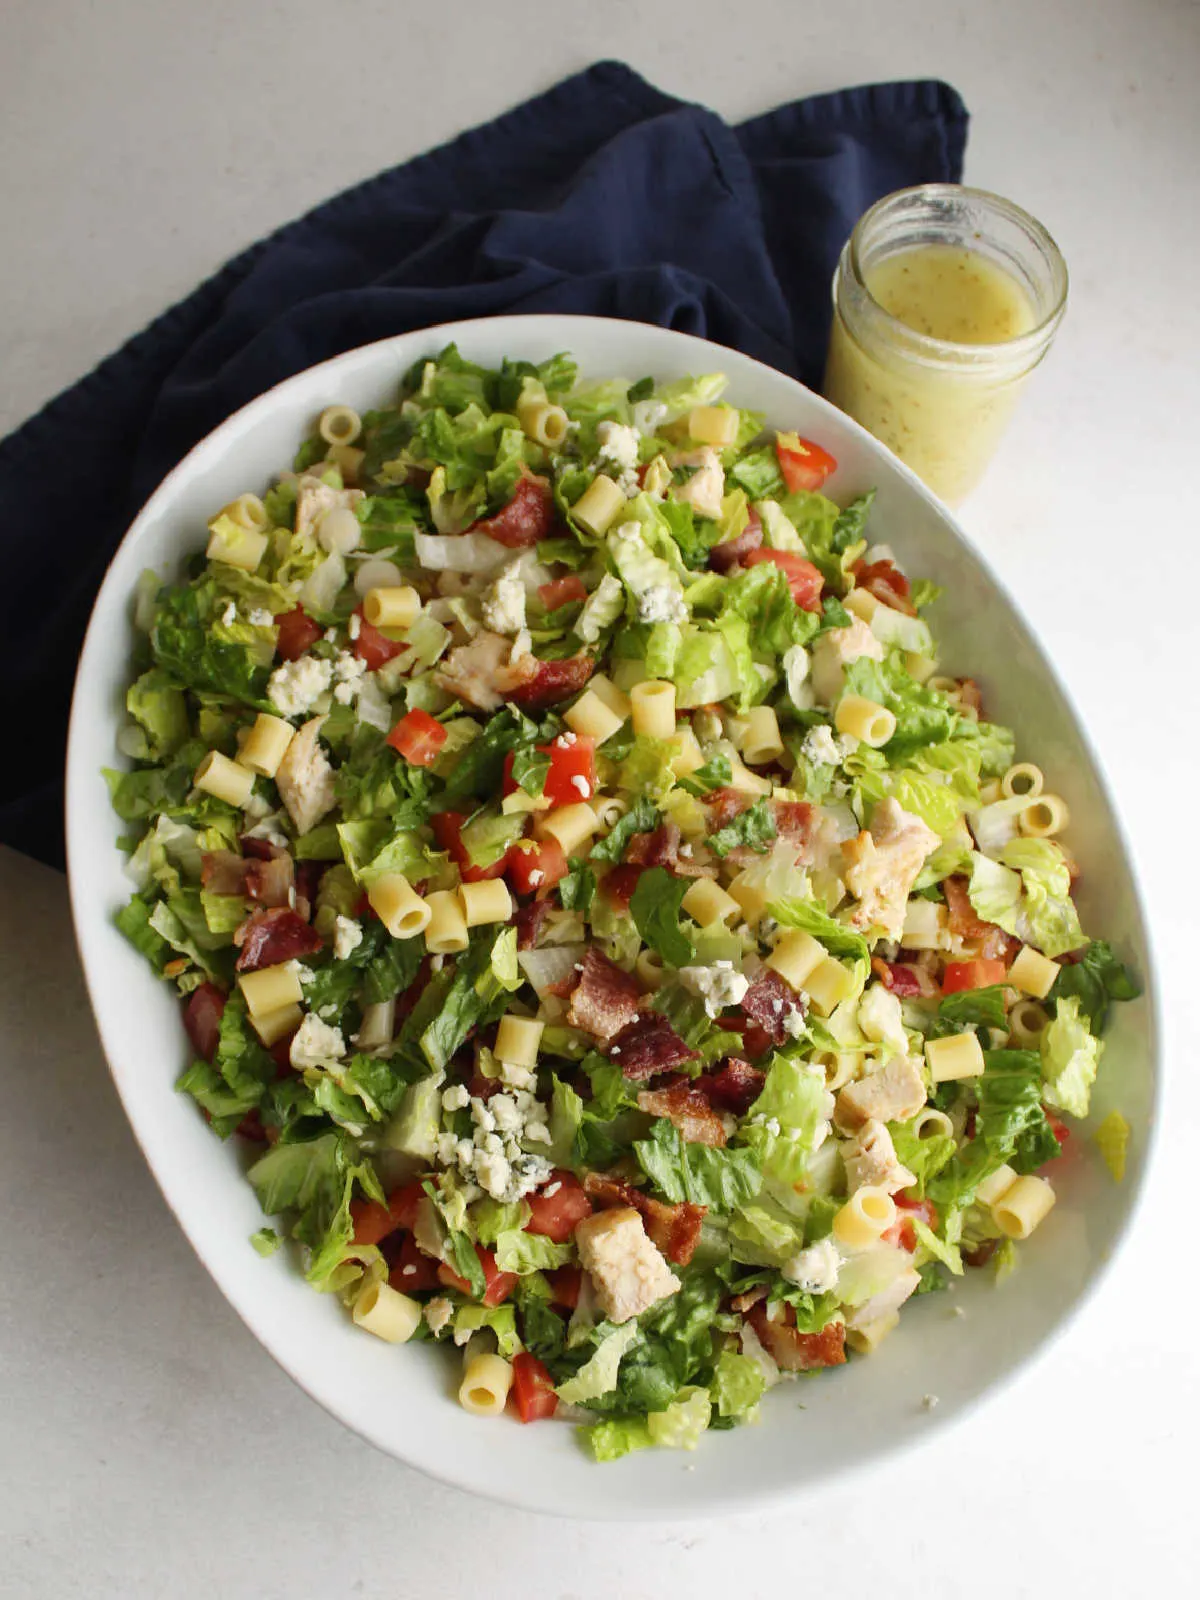 Tossed chopped salad with jar of vinaigrette nearby.